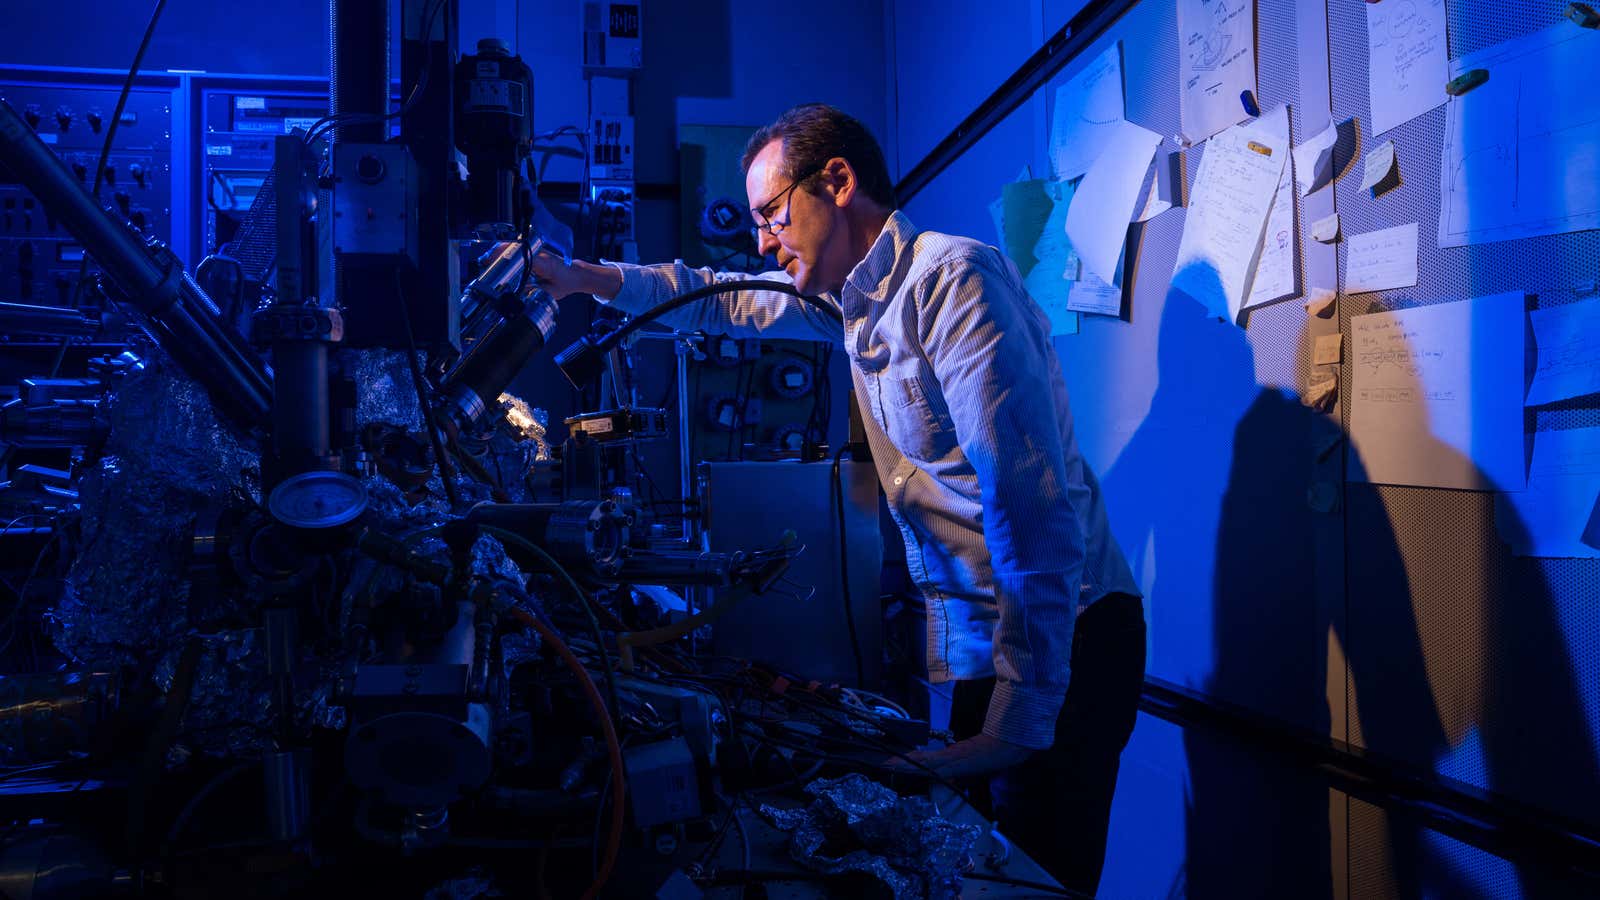 IBM researcher Christopher Lutz inspecting the microscope used to track the single-atom data store.